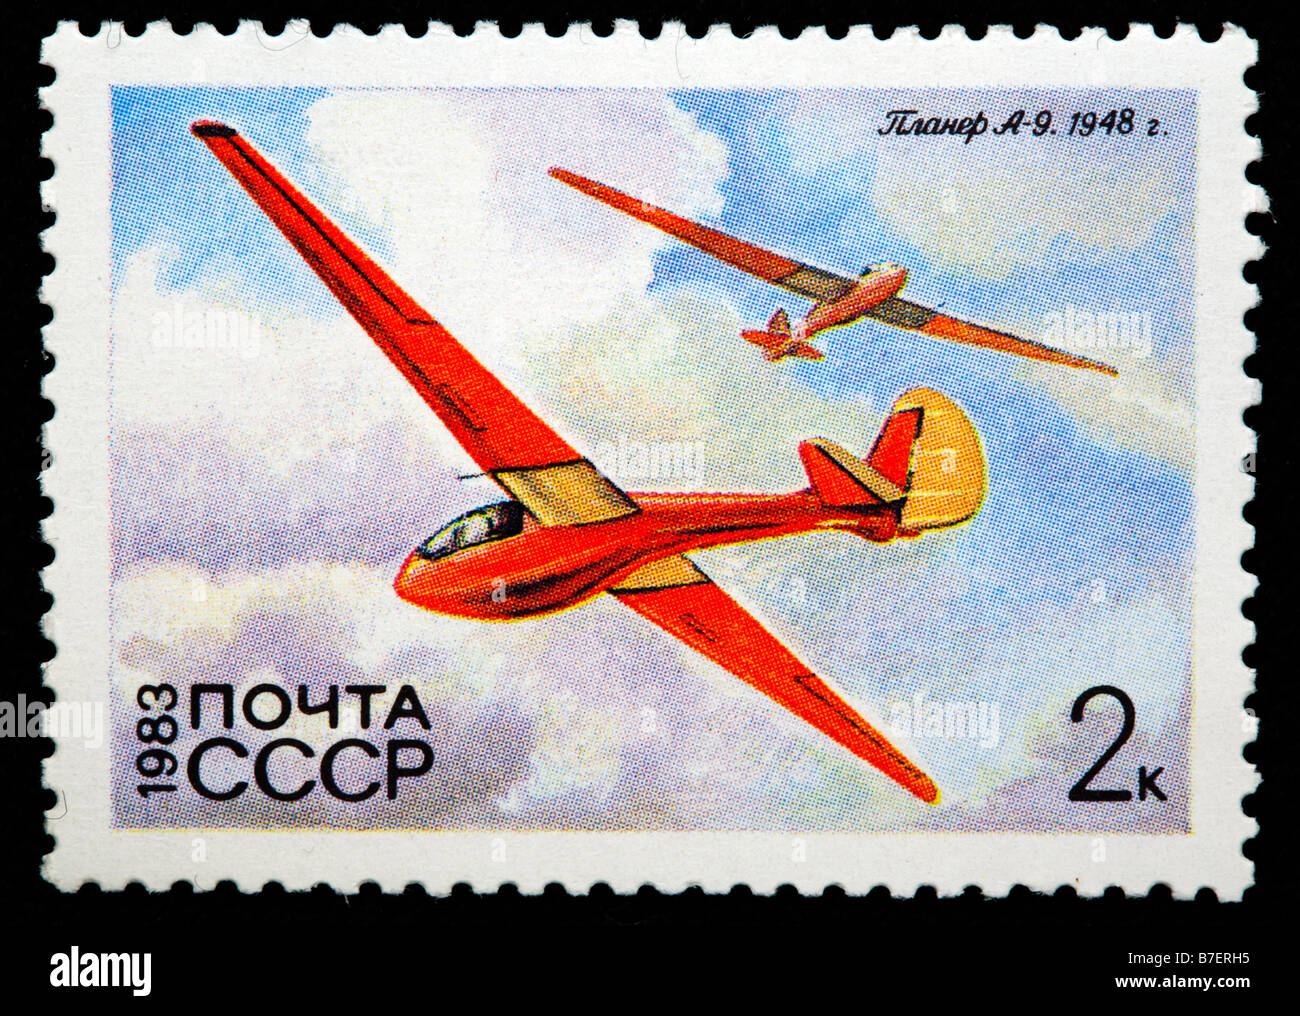 History of aviation, Russian glider 'A 9' (1948), postage stamp, USSR, Russia, 1983 Stock Photo